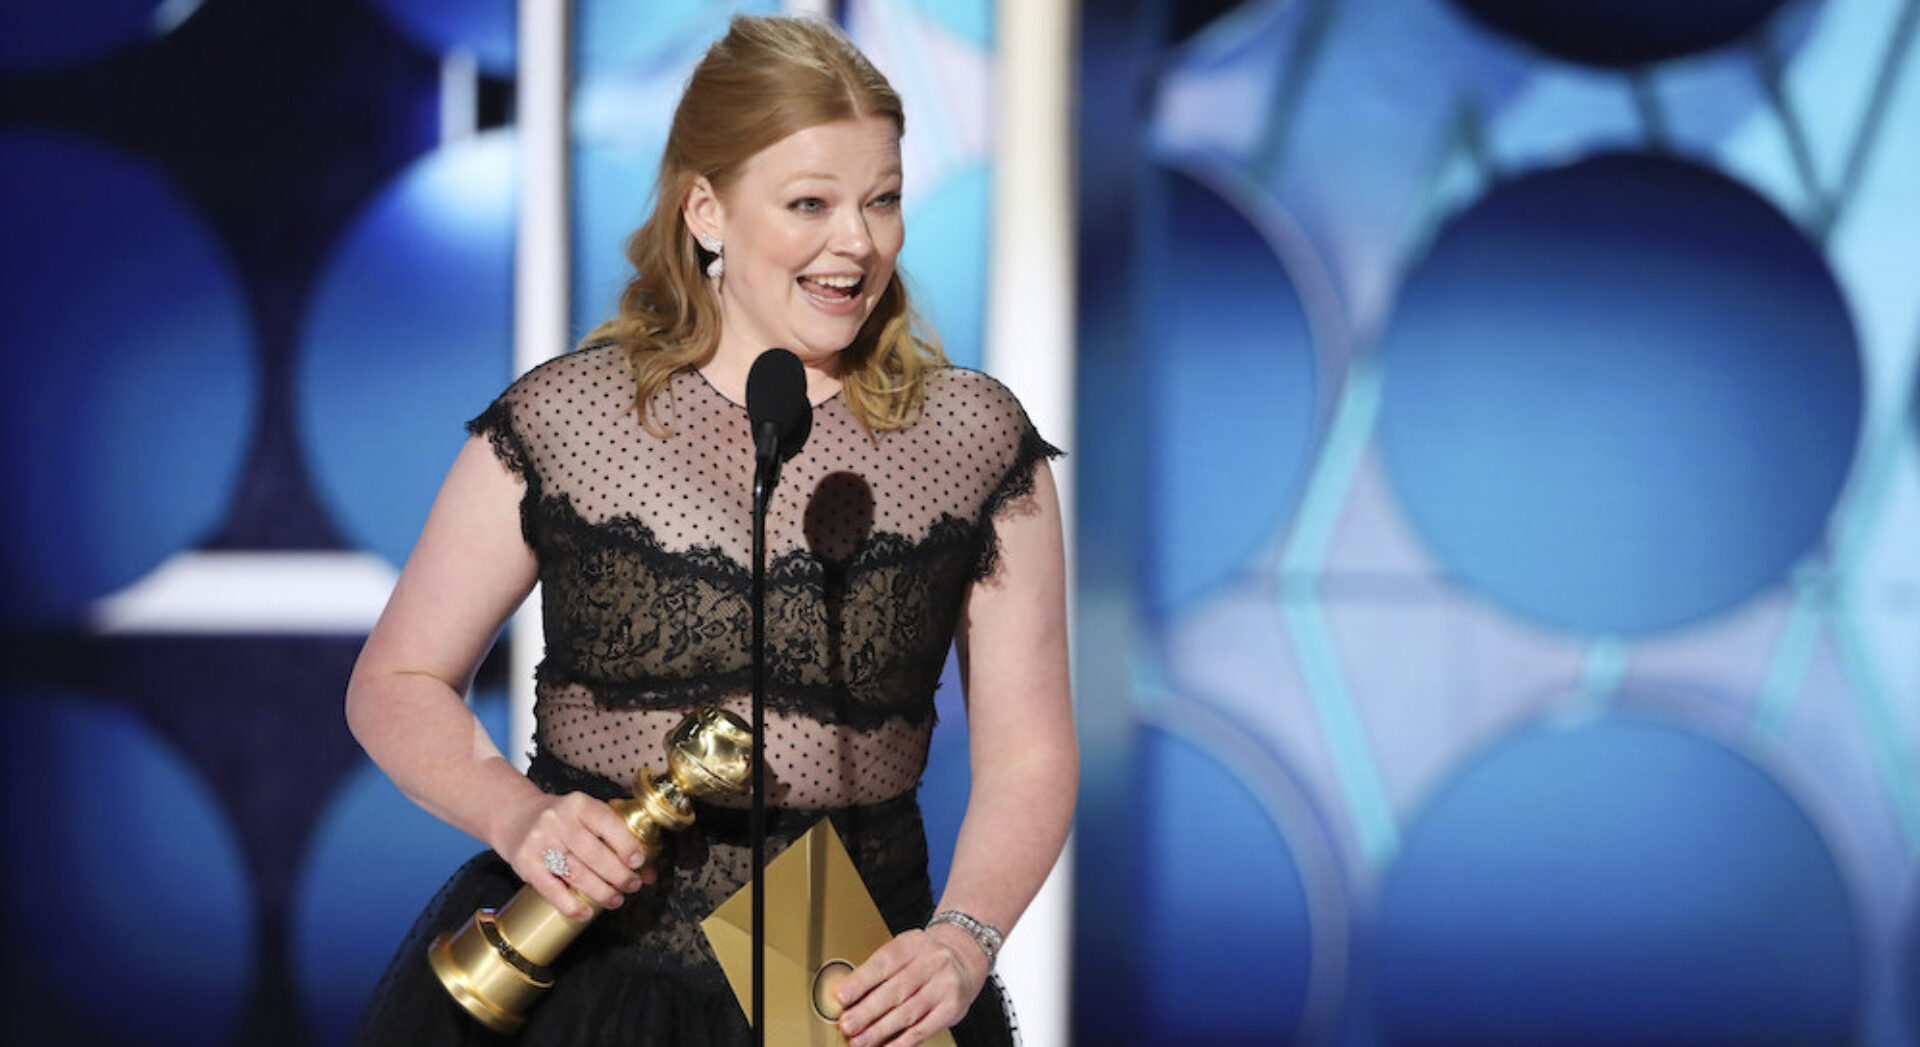 Congratulations are in order. Sarah Snook took home her first Golden Globe for 'Lead Actress in a Drama Series,' for her work on Succession.